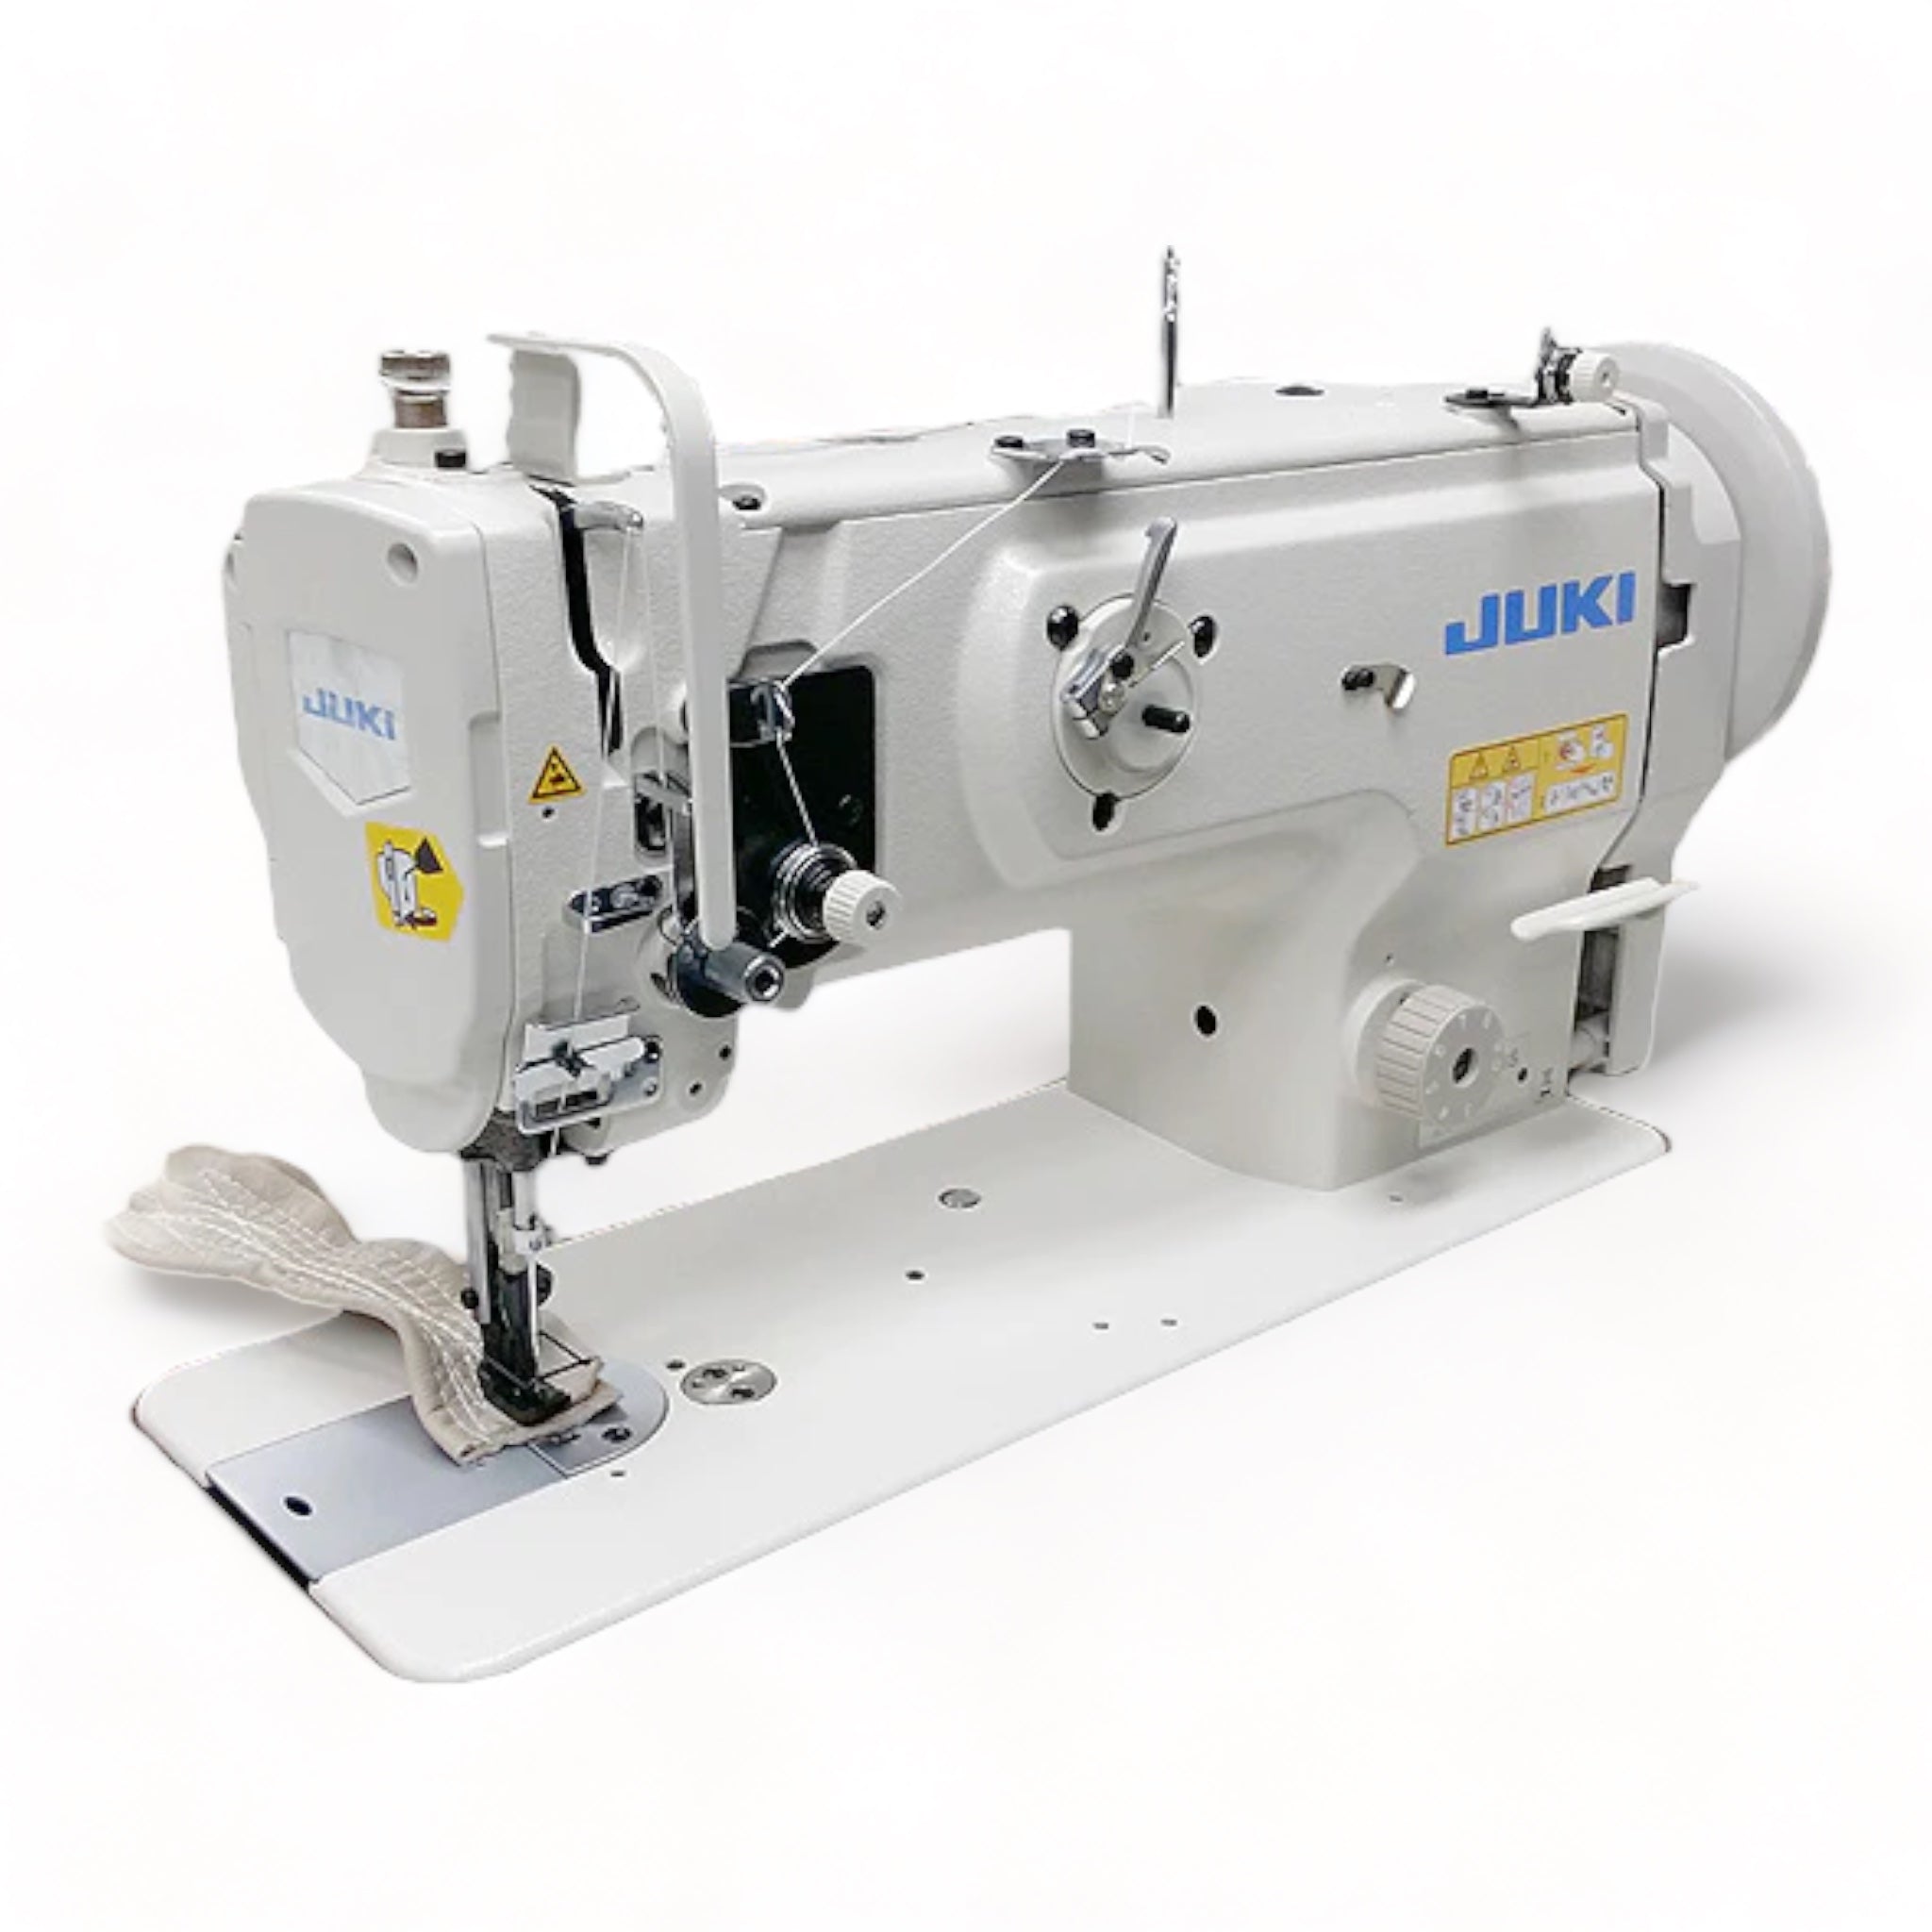 JUKI DNU-1541 Single Needle Heavy Duty Unison Feed Walking Foot Sewing Machine Assembled with Servo Motor, Table and Stand Included (Copy)